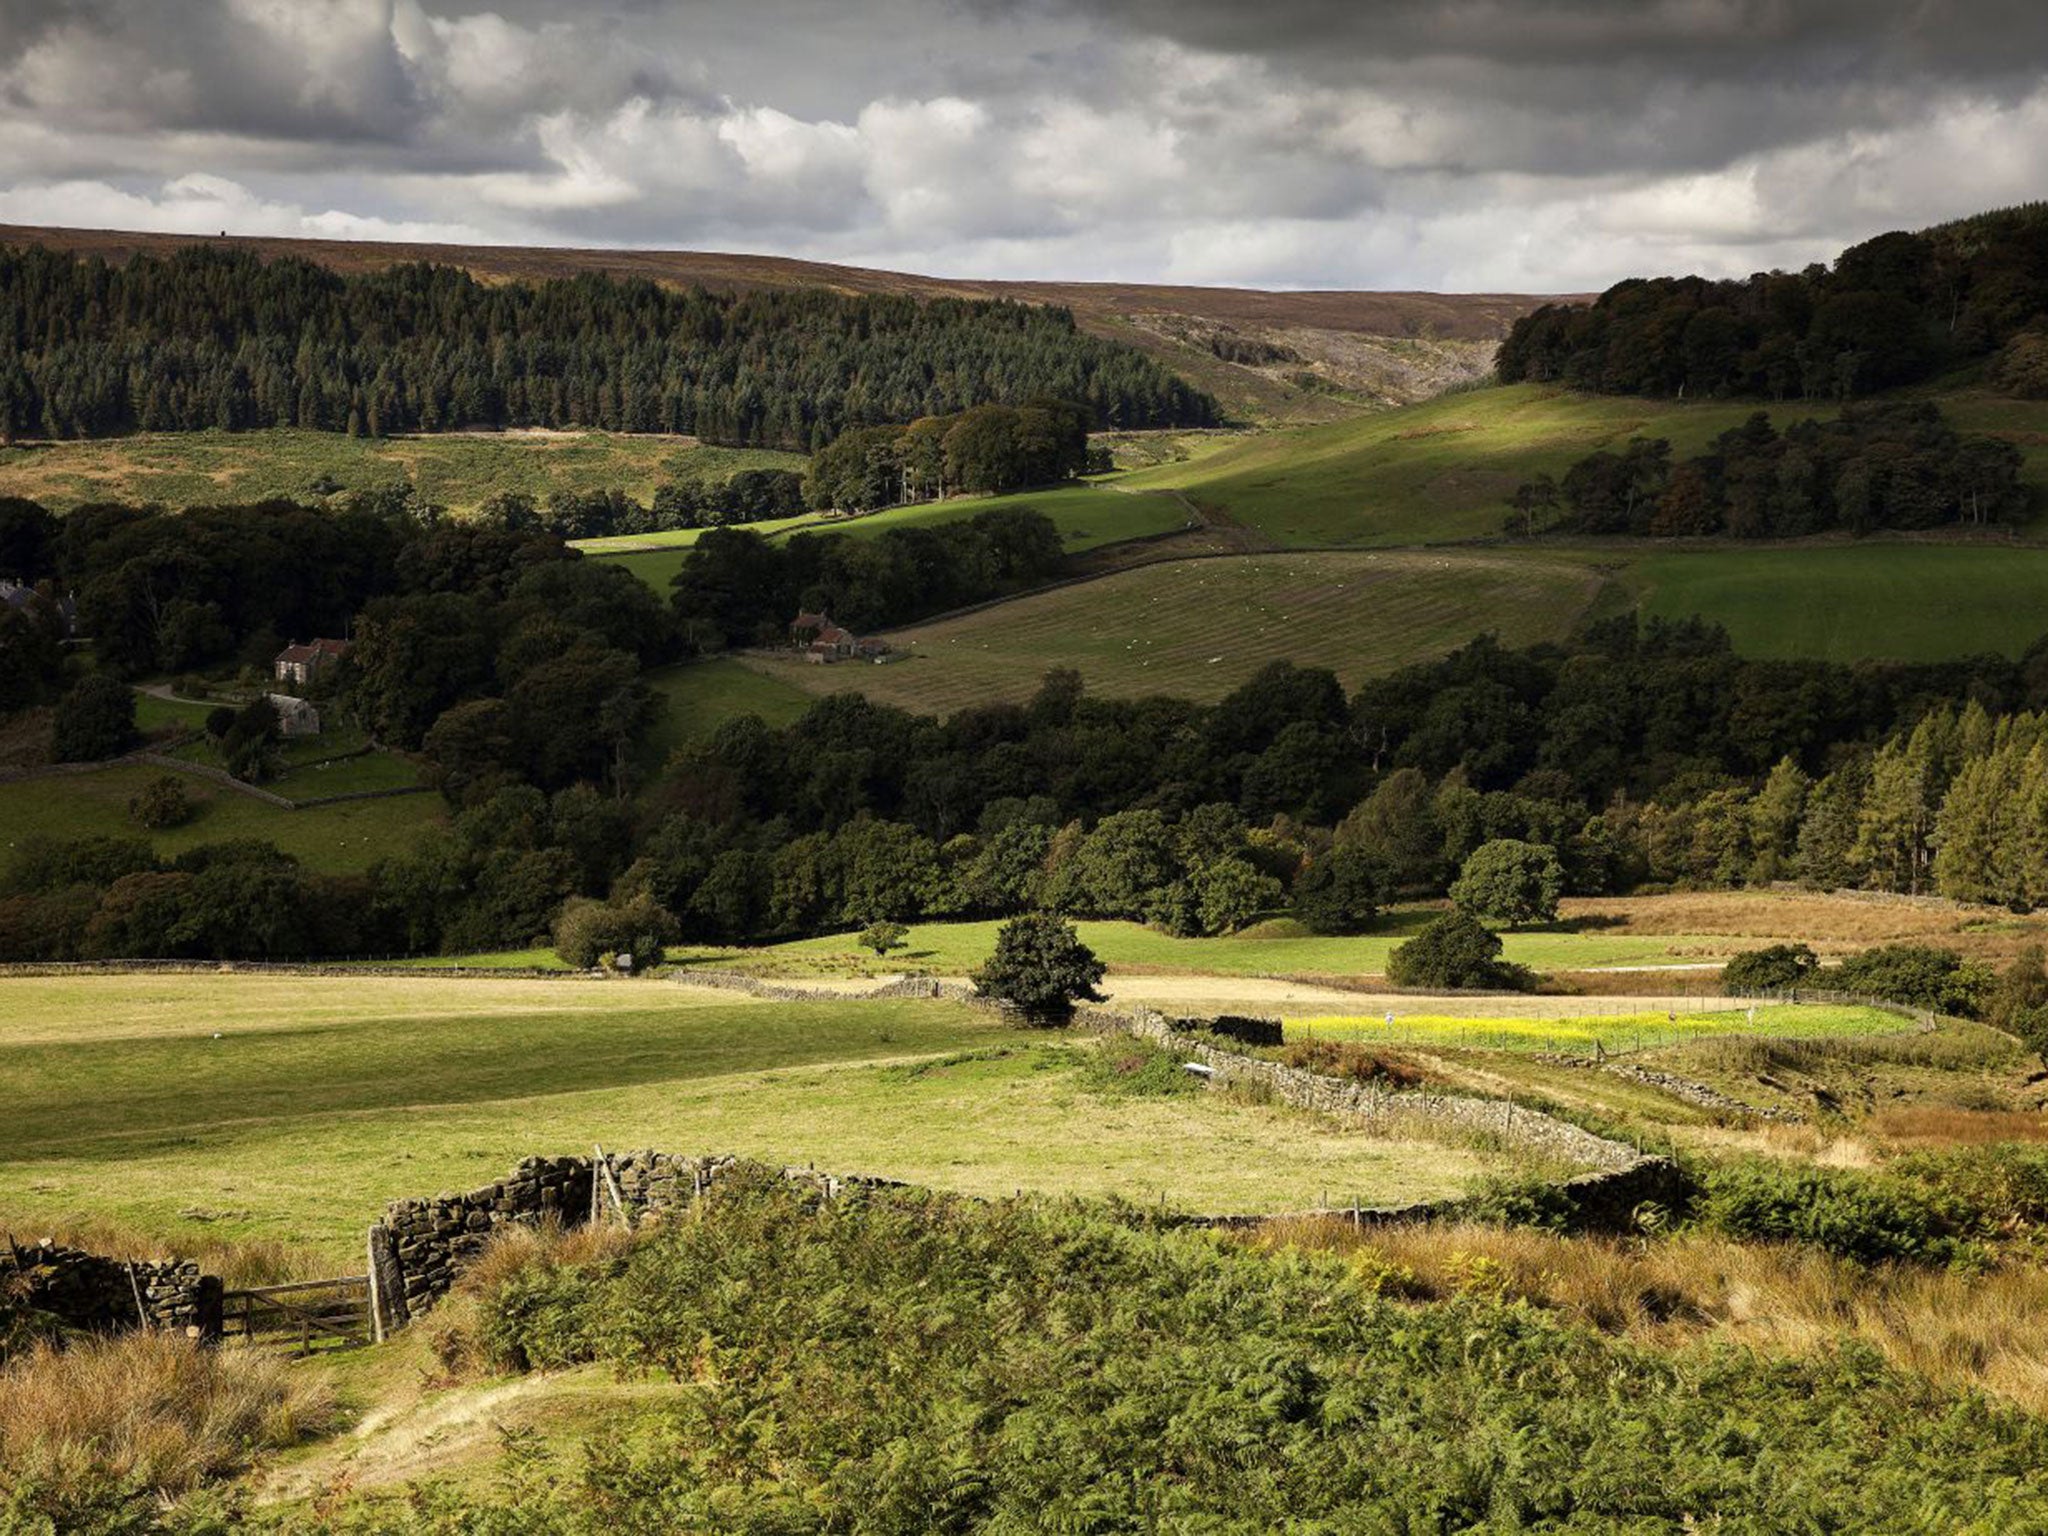 The Yorkshire Dales: voters in rural areas of God’s Own County favoured Brexit, while those in Harrogate and Leeds were for Remain